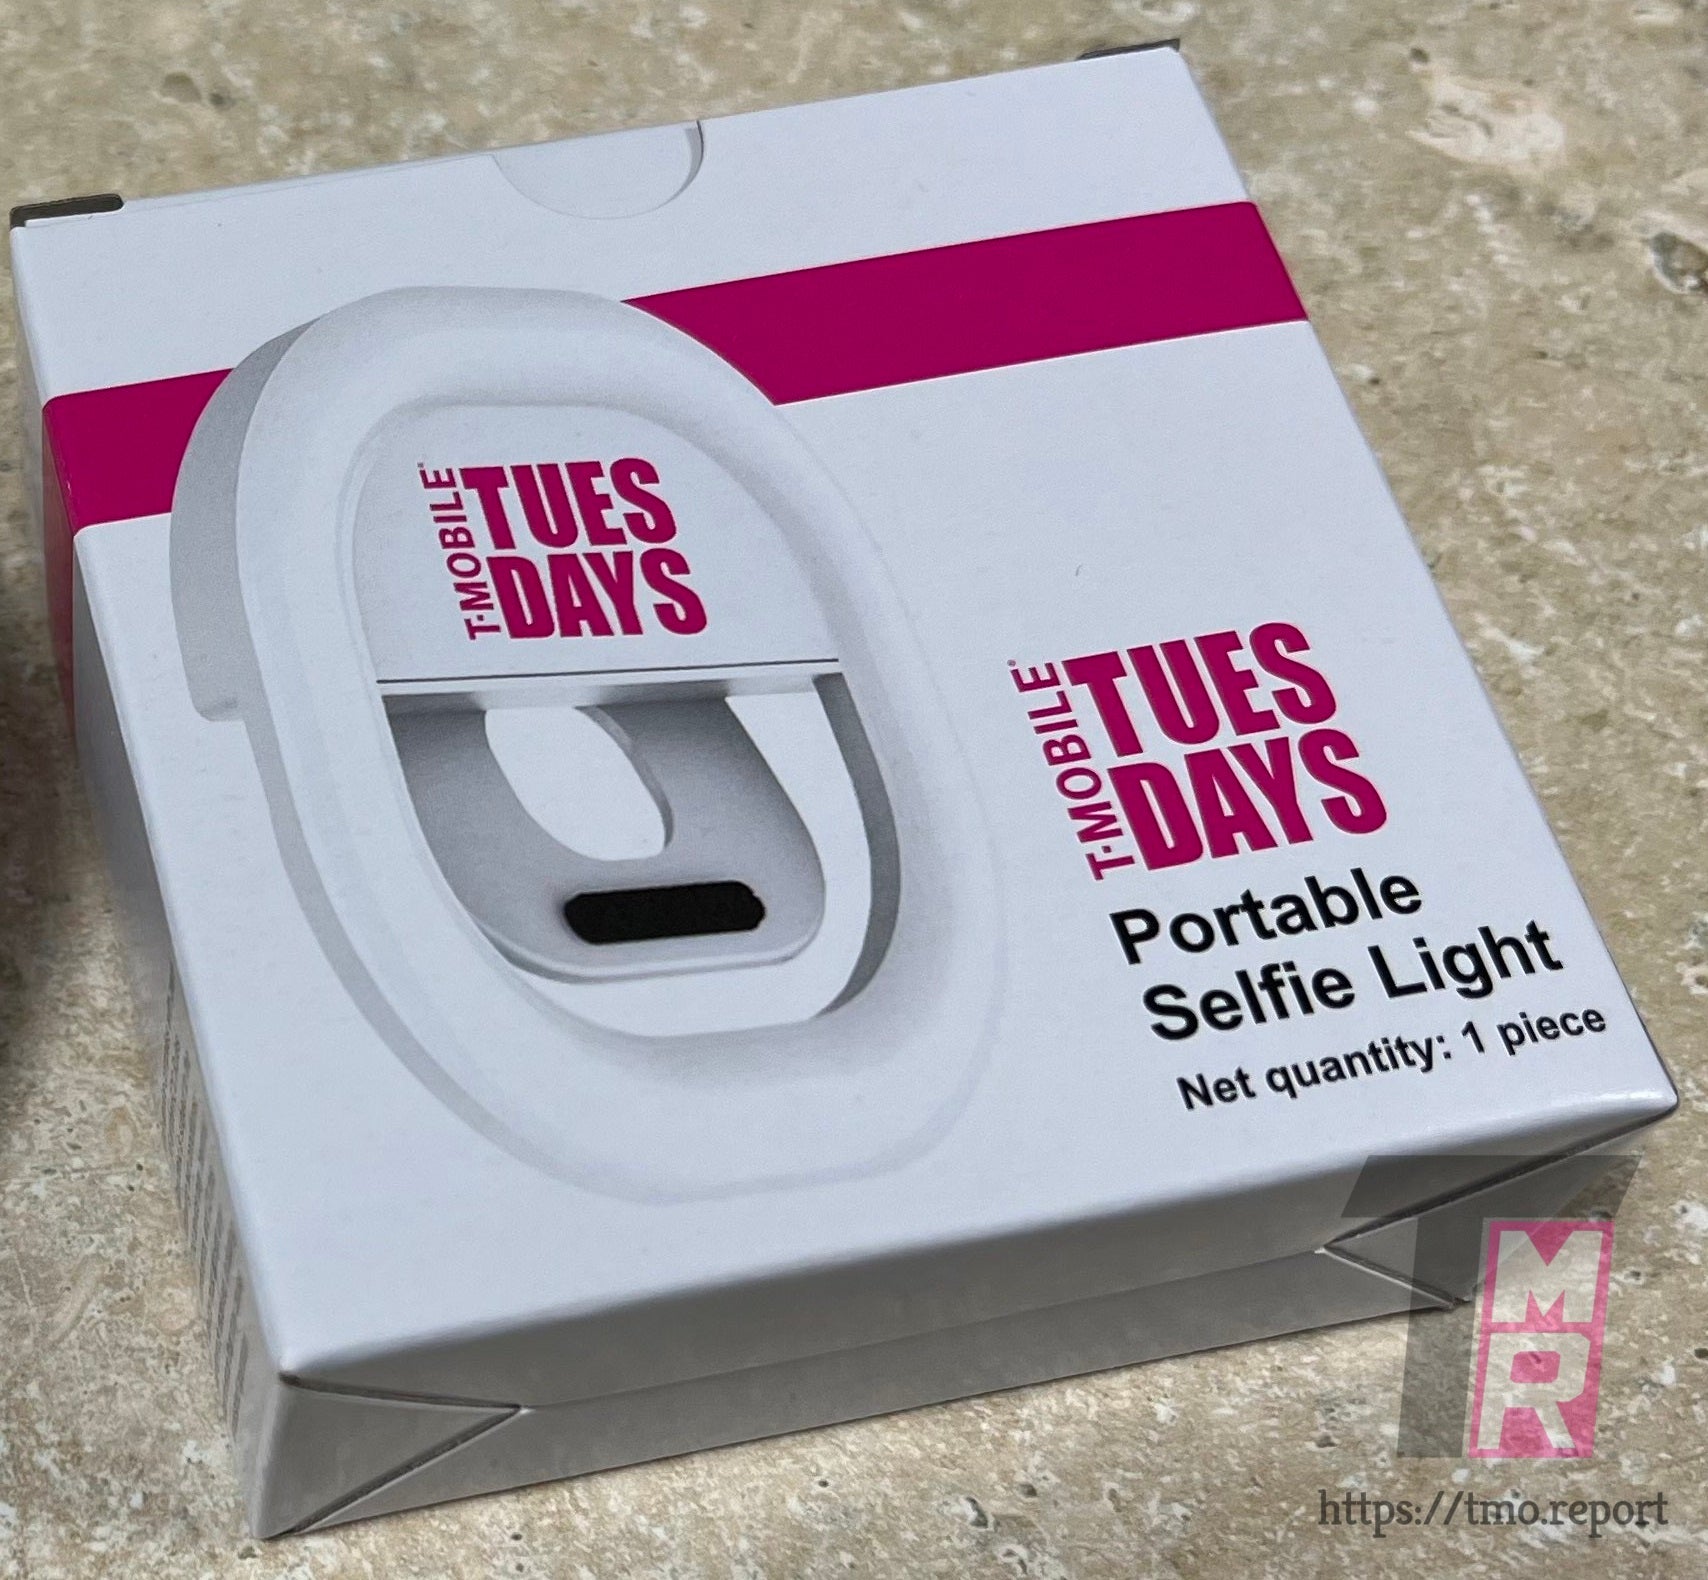 T-Mobile will soon be giving away a free Portable Selfie Light to customers as part of its reward program - T-Mobile customers soon will get a useful gift via the carrier's weekly rewards program